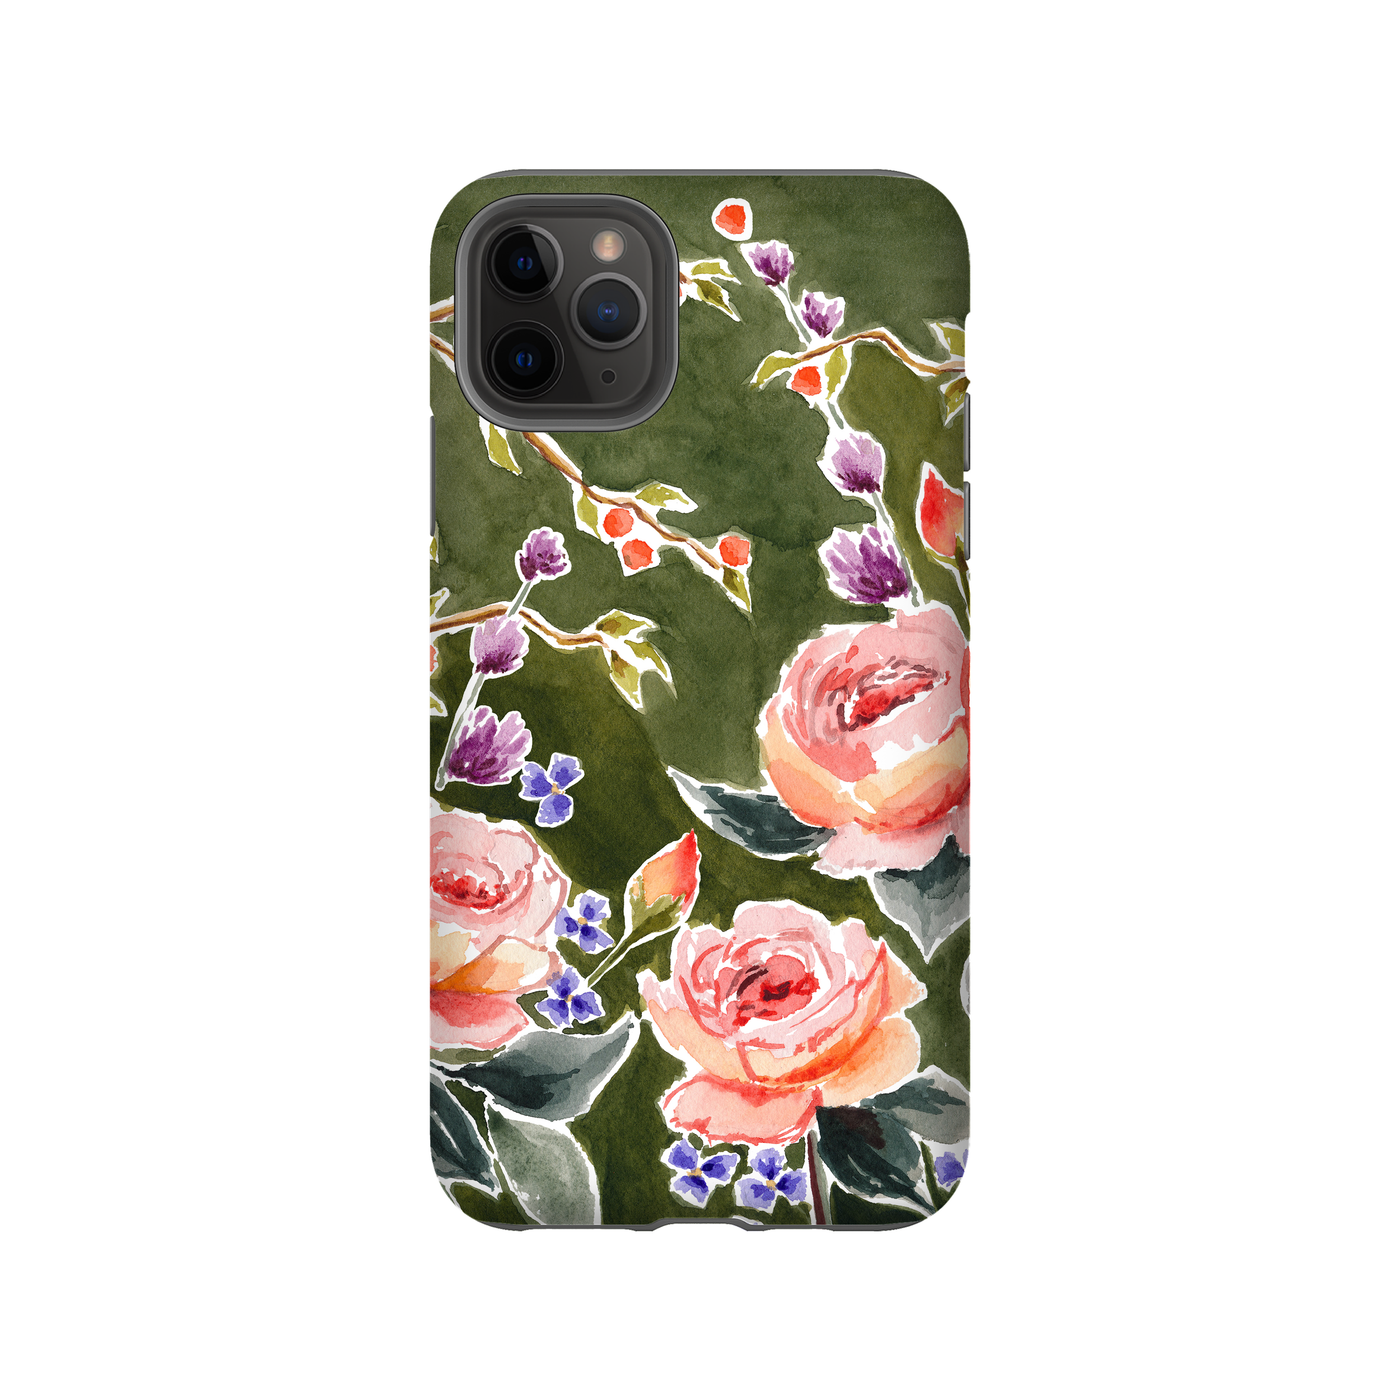 MYSTERY PHONE CASE iPhone 11 Pro Max